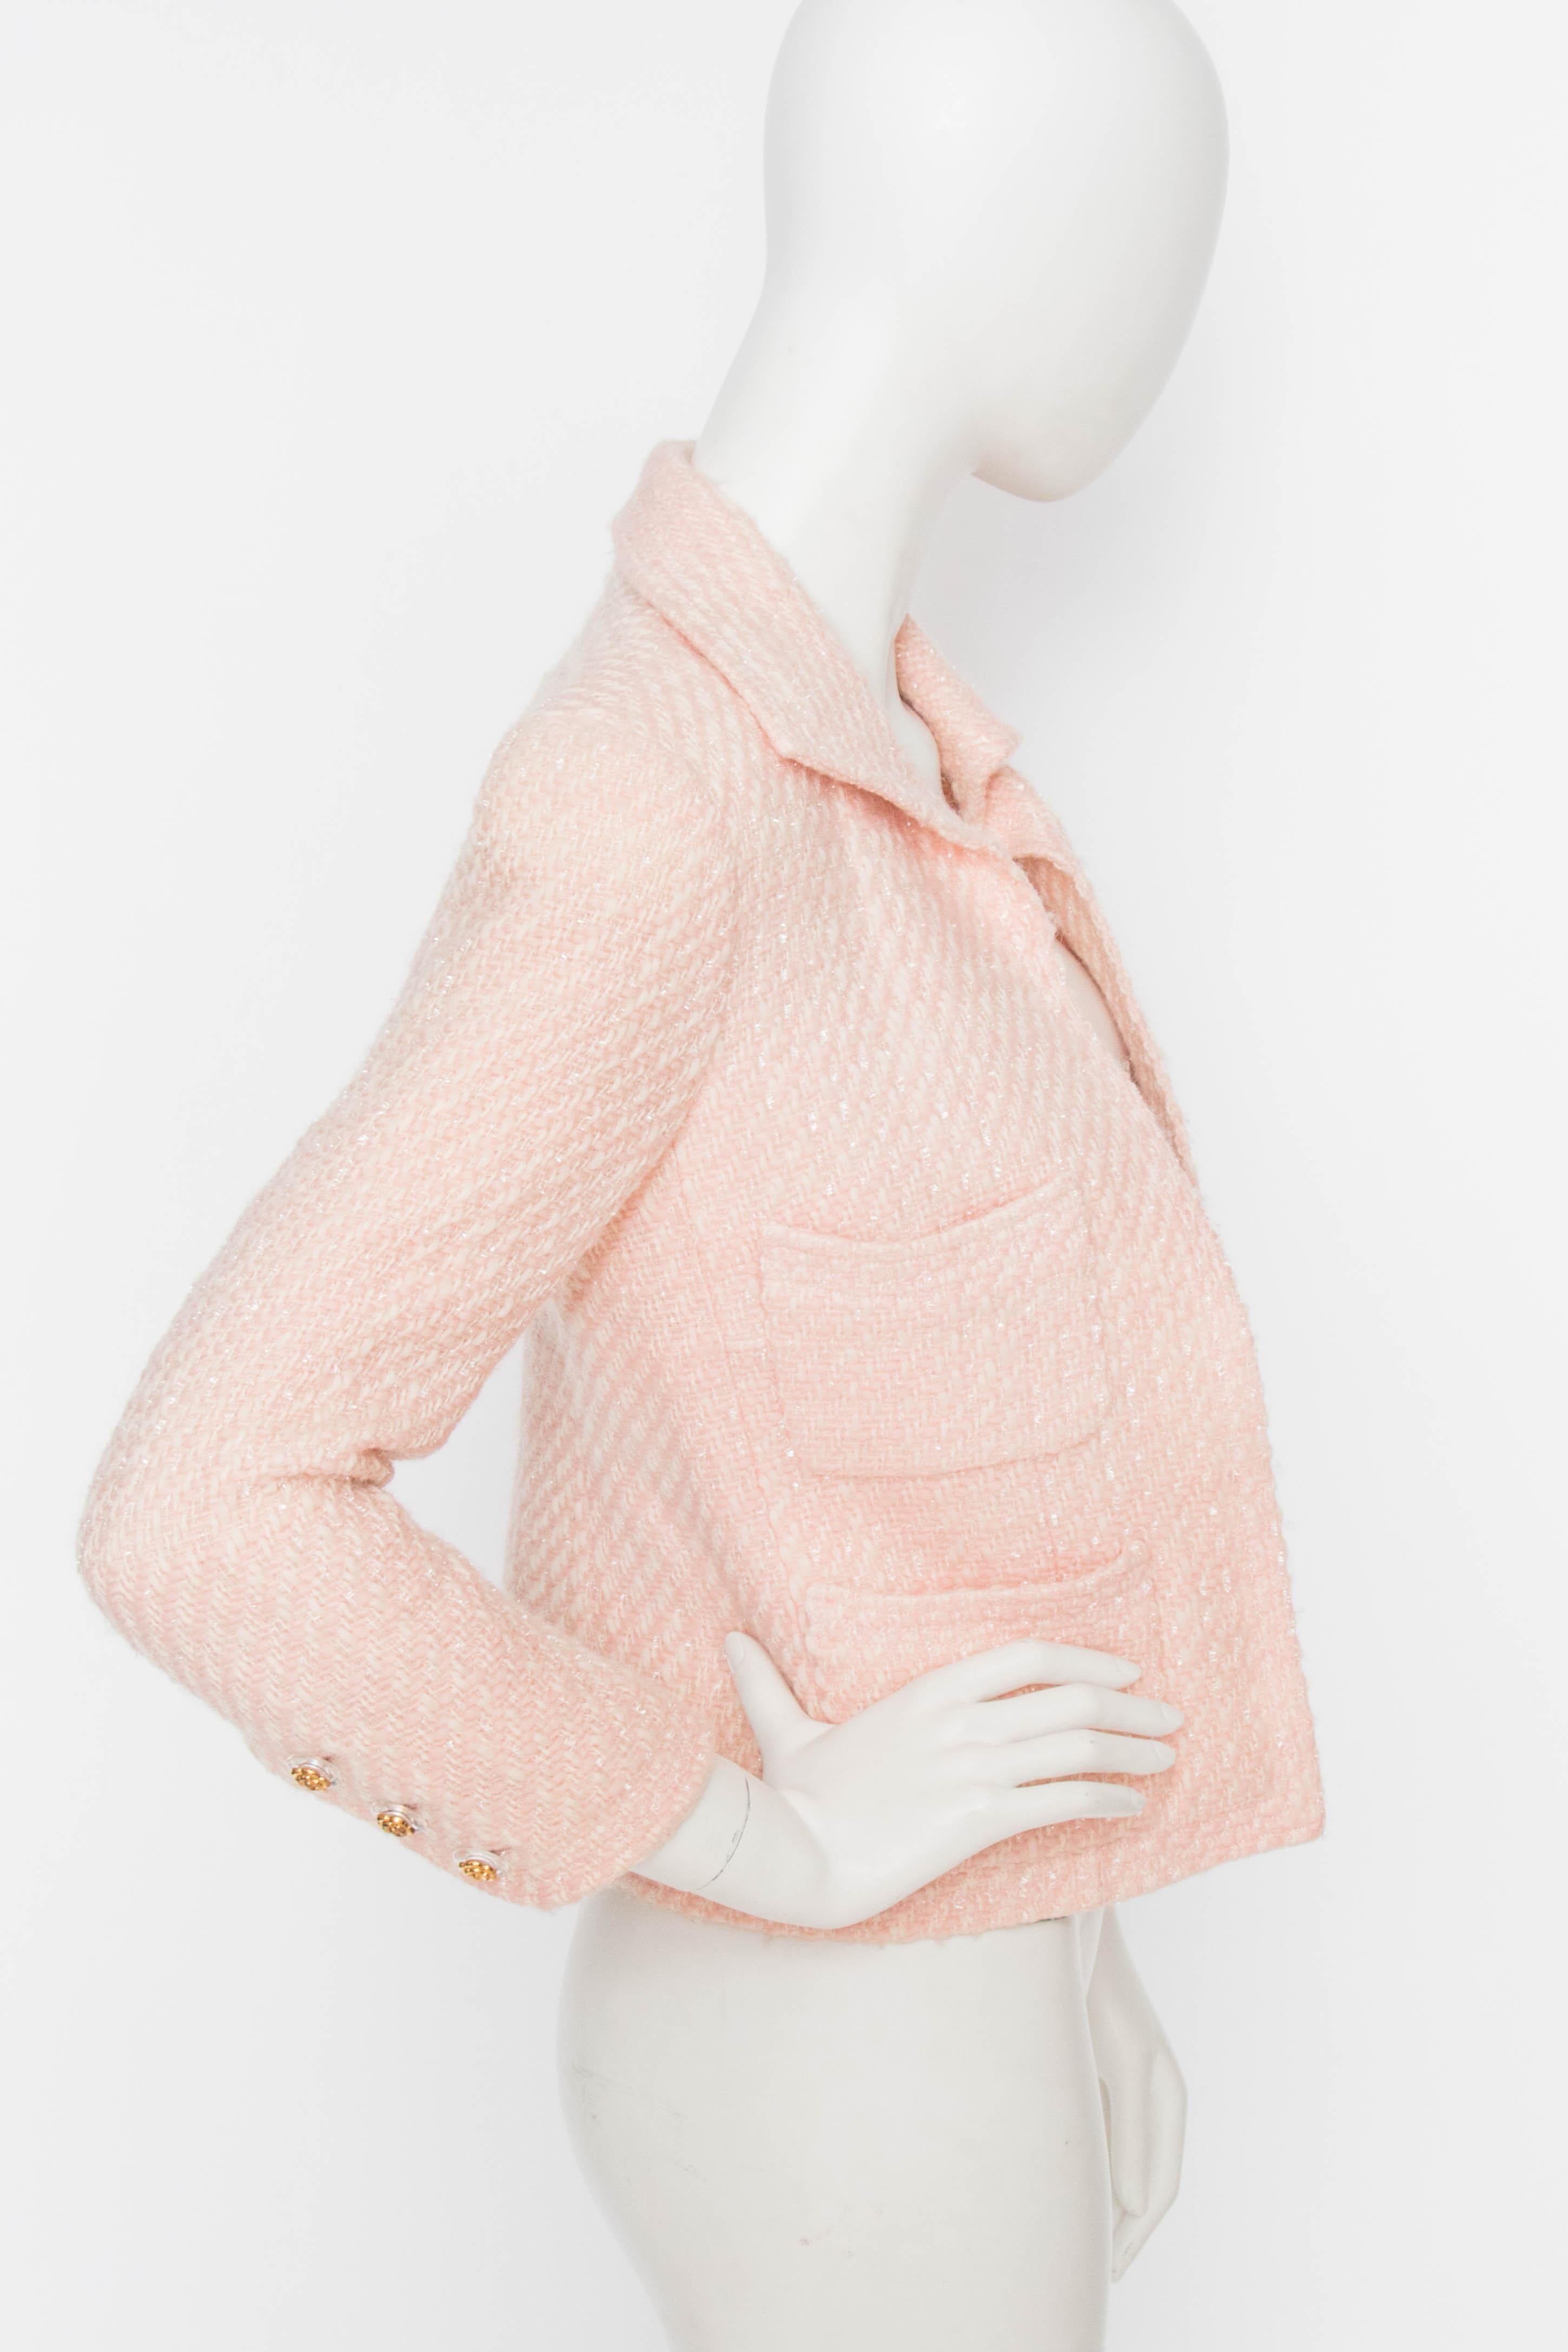 A 1990s Chanel Pink Boucle jacket with an open front and a set of patch pockets on the breast and hip respectively.
The jacket is fully lined in matching pink silk with jacquard-woven double 'C' logo. A row of gold-toned Chanel rose buttons are set